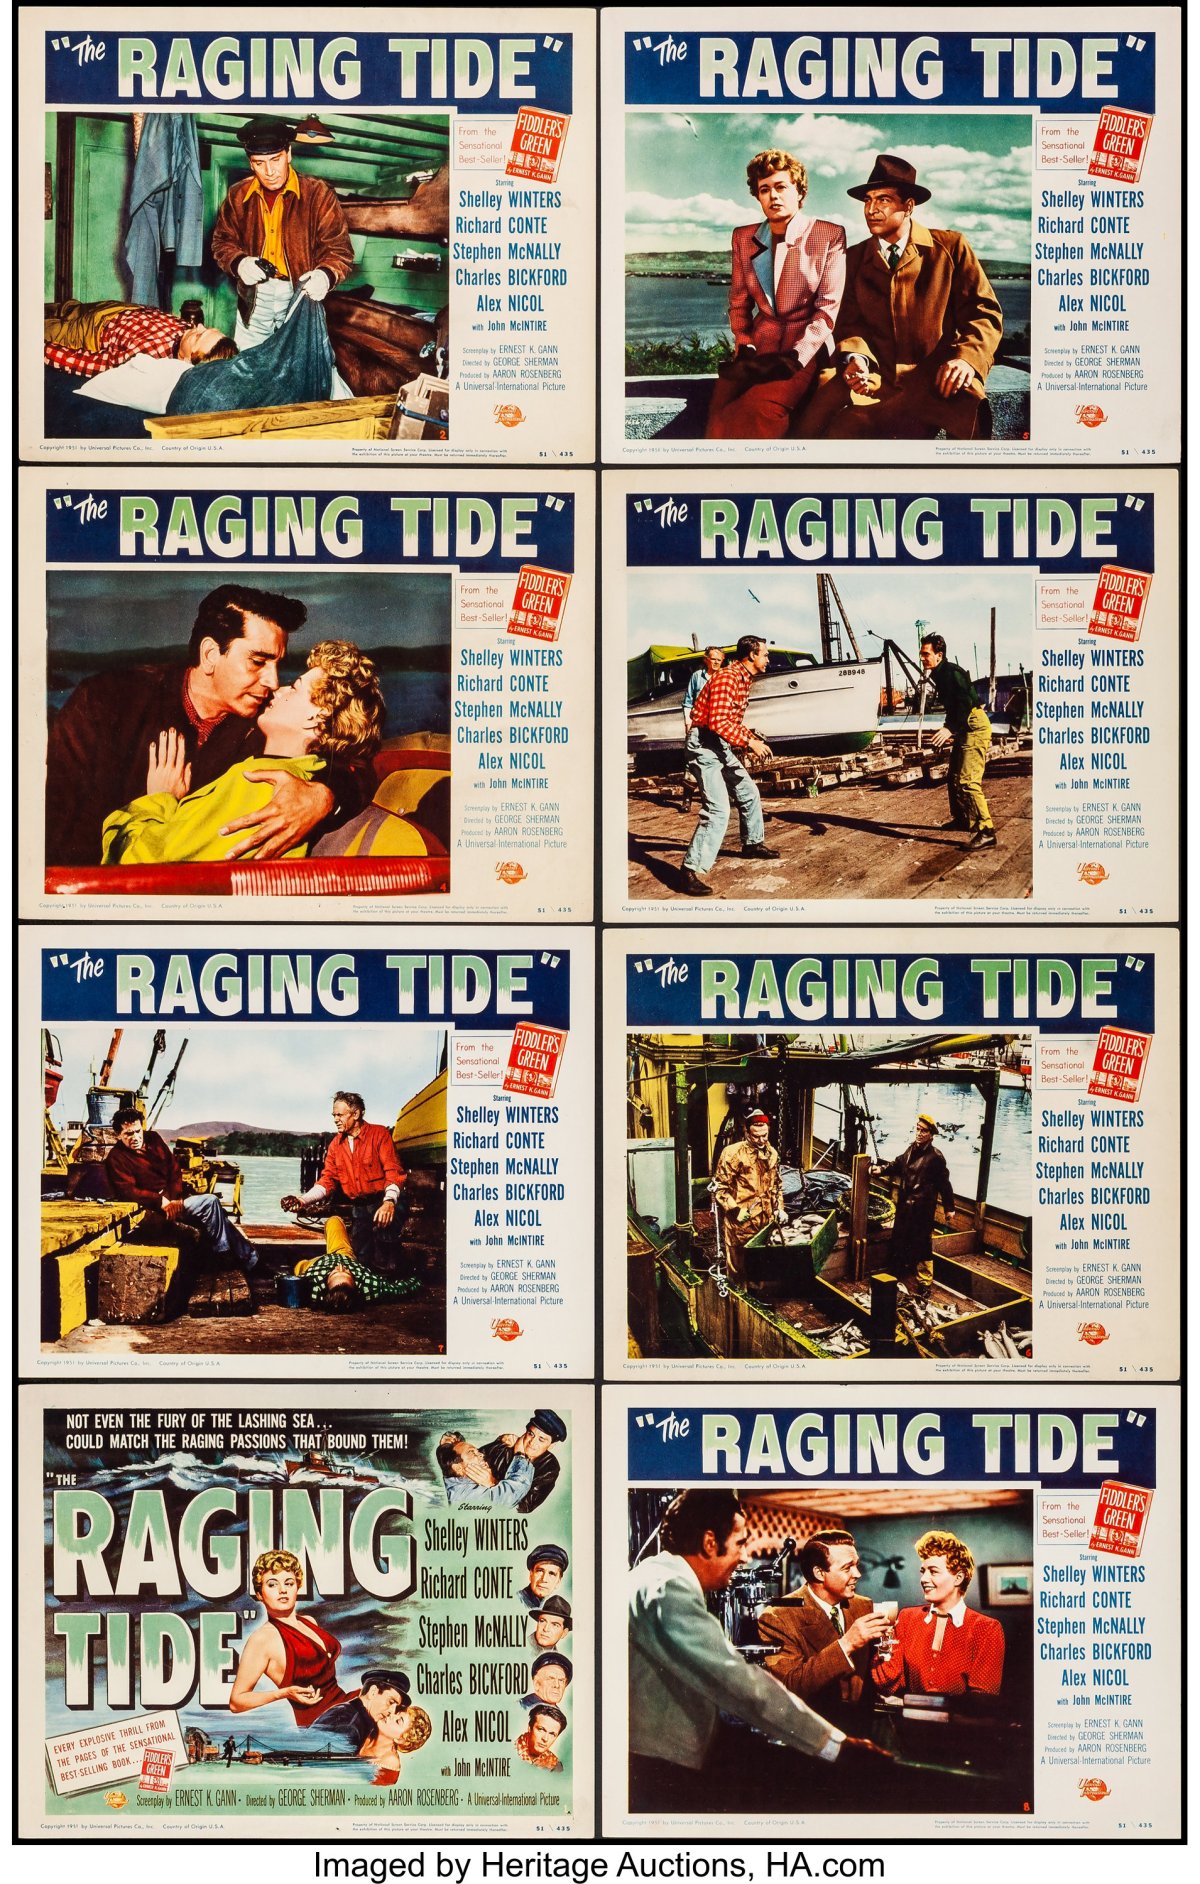 Pepito’s Filmography: “The Raging Tide” Starring Richard Conte & Shelley Winters (1951)